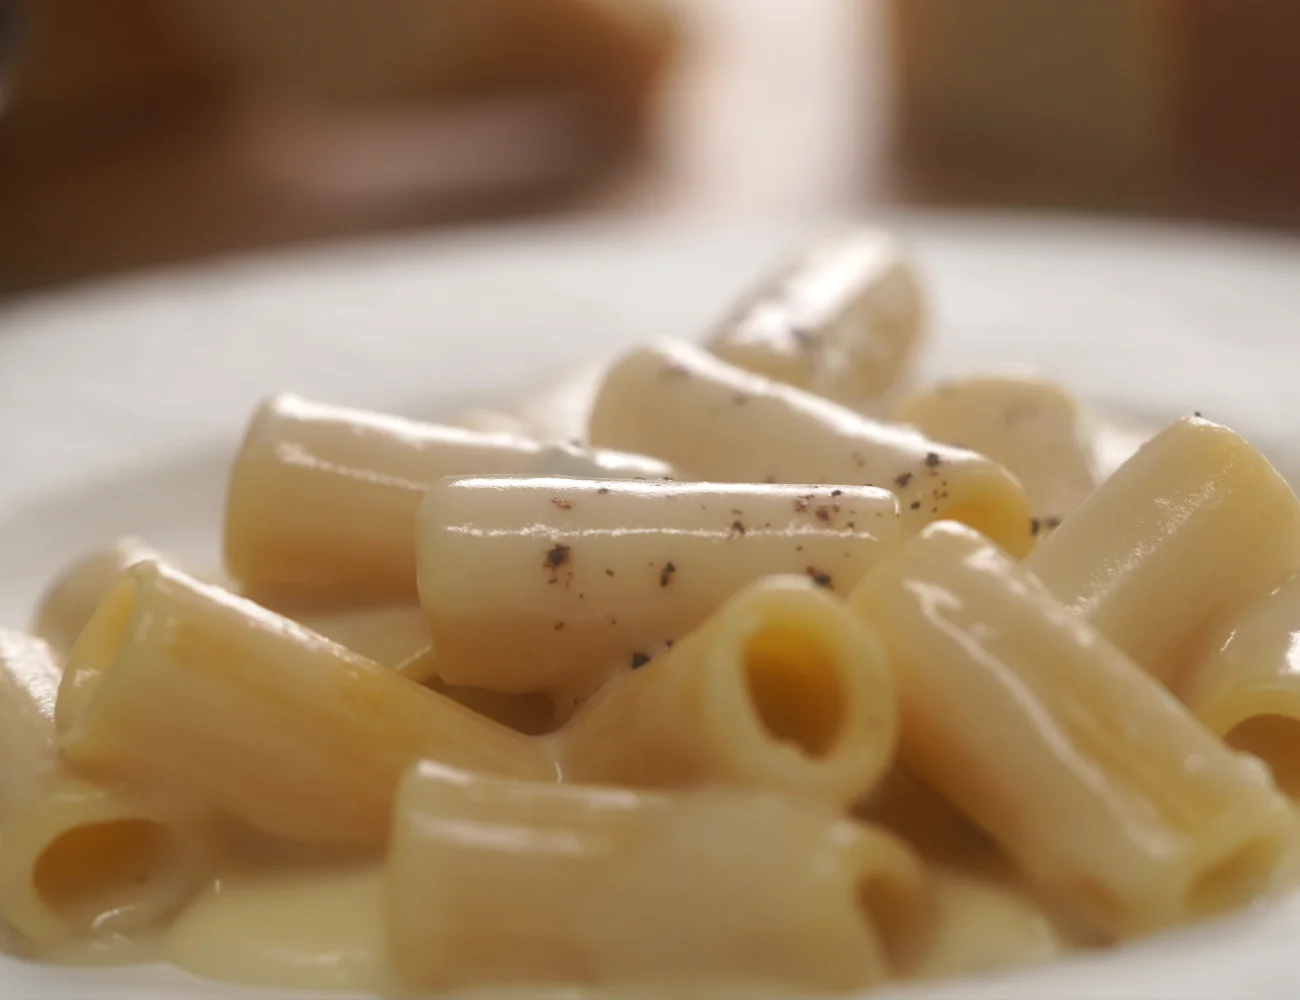 Rigatoni with Sirloin and Gorgonzola Sauce Recipe - Quick From Scratch Pasta